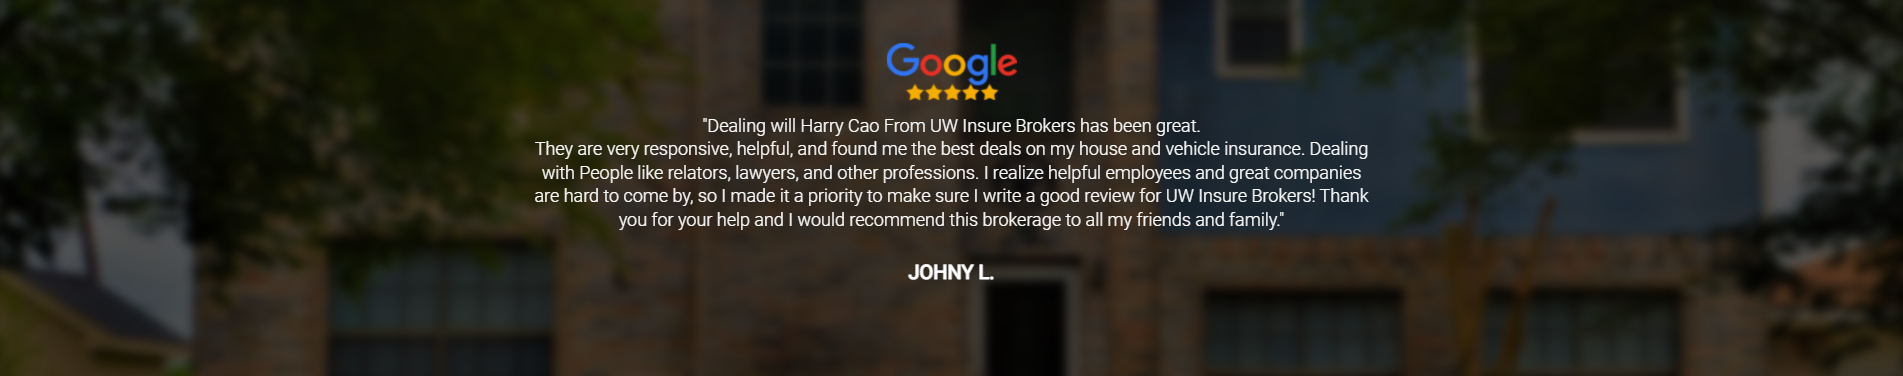 Testimonial from Johny L, responsive, thanks and highly recommended